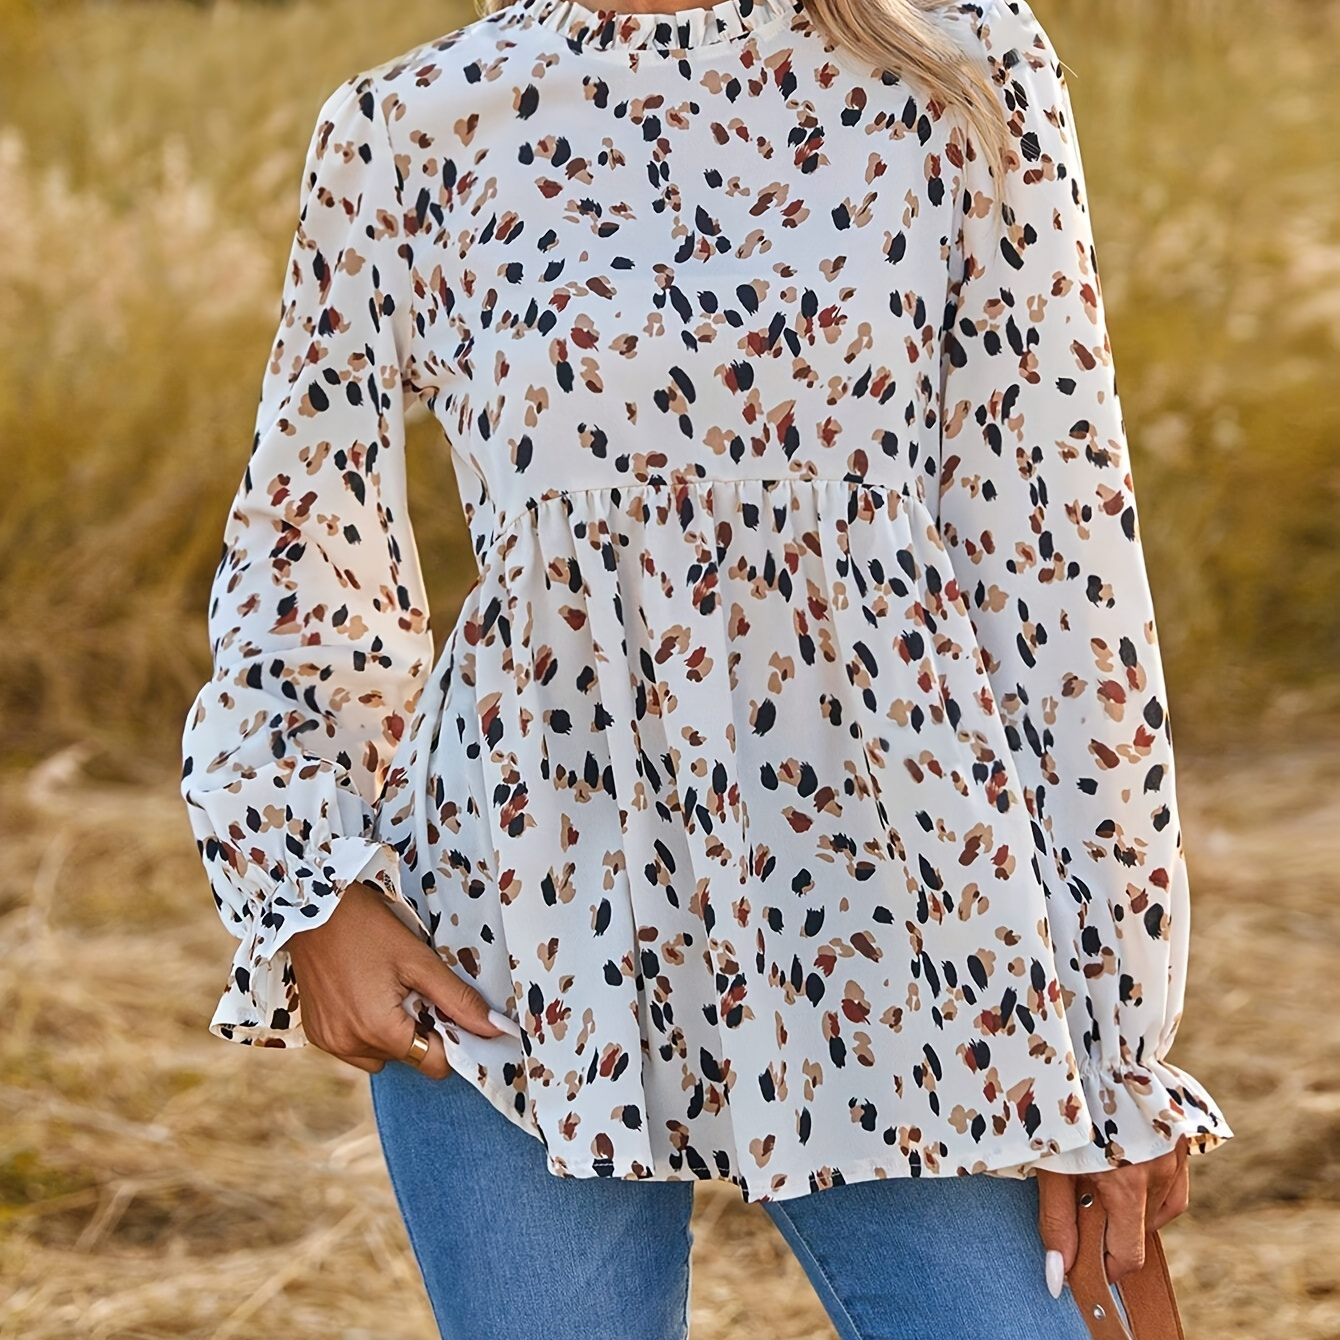 

Leopard Print Ruffle Crew Neck Flare Blouse, Casual Long Bell Sleeve Top For Spring & Fall, Women's Clothing